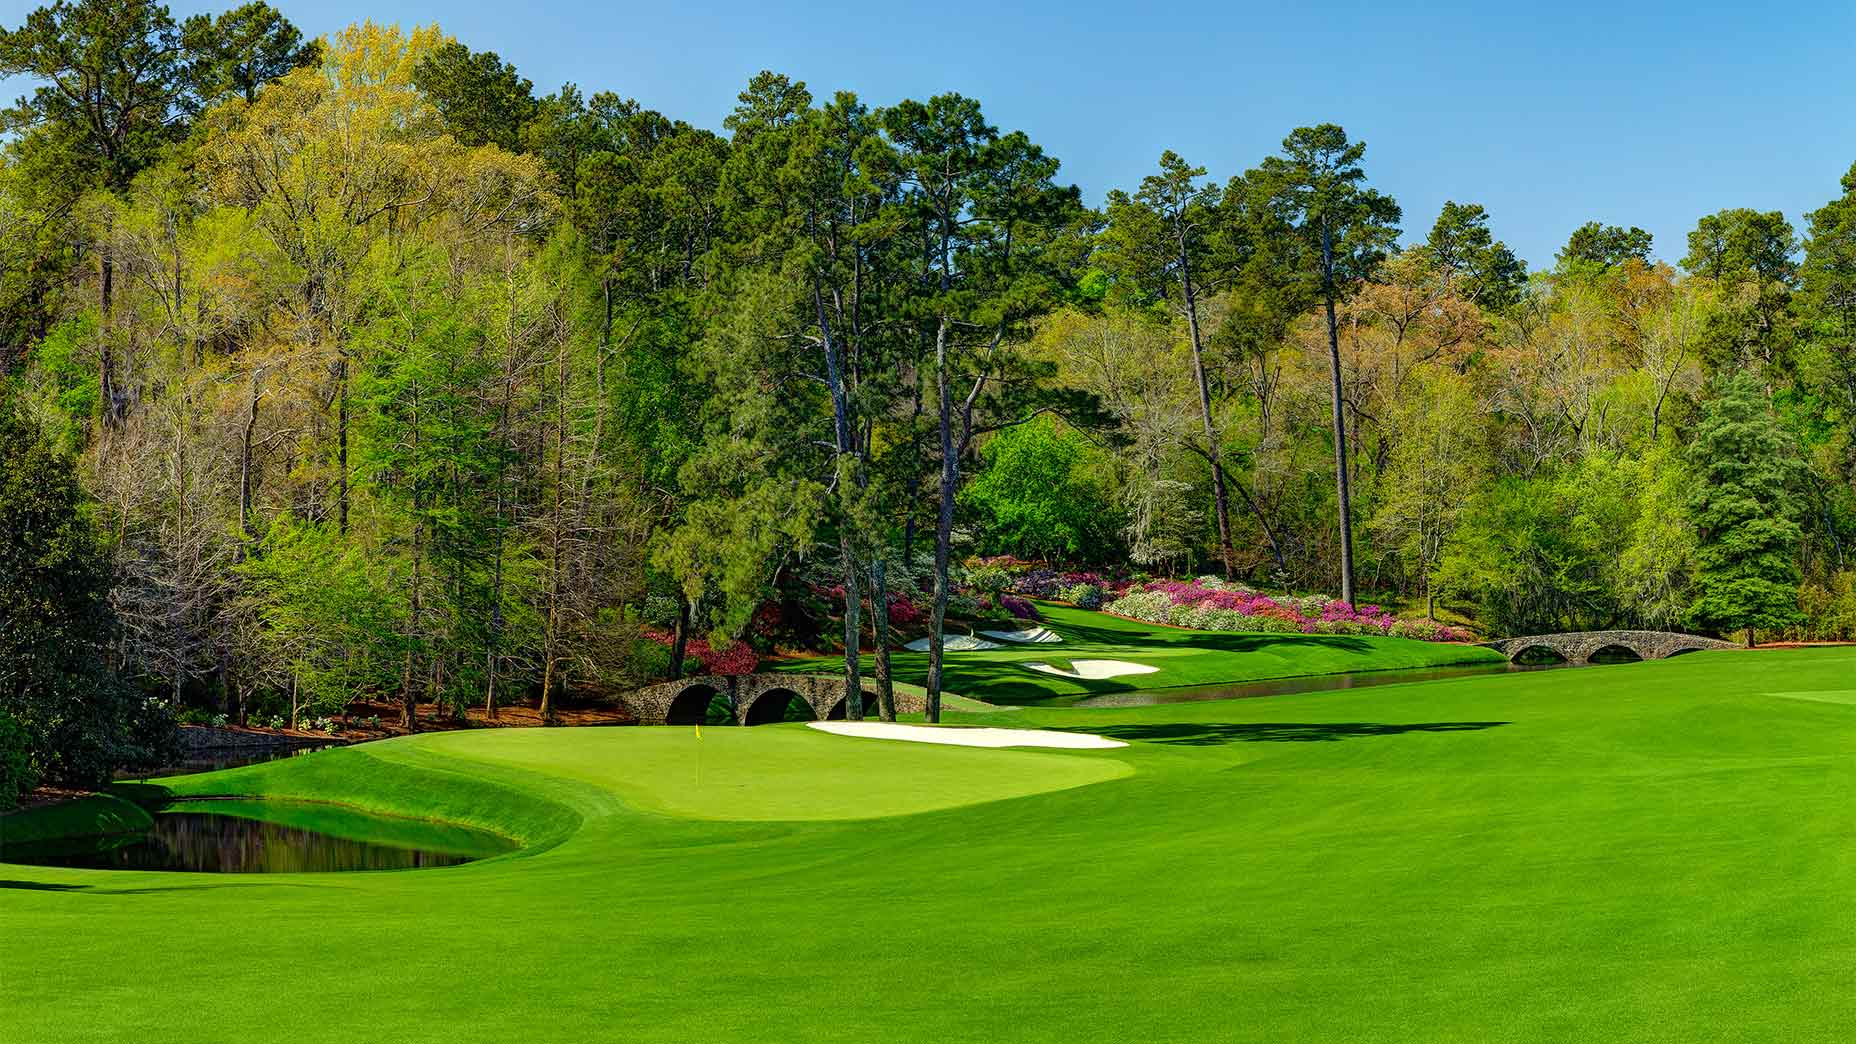 The 11th hole at Augusta National.